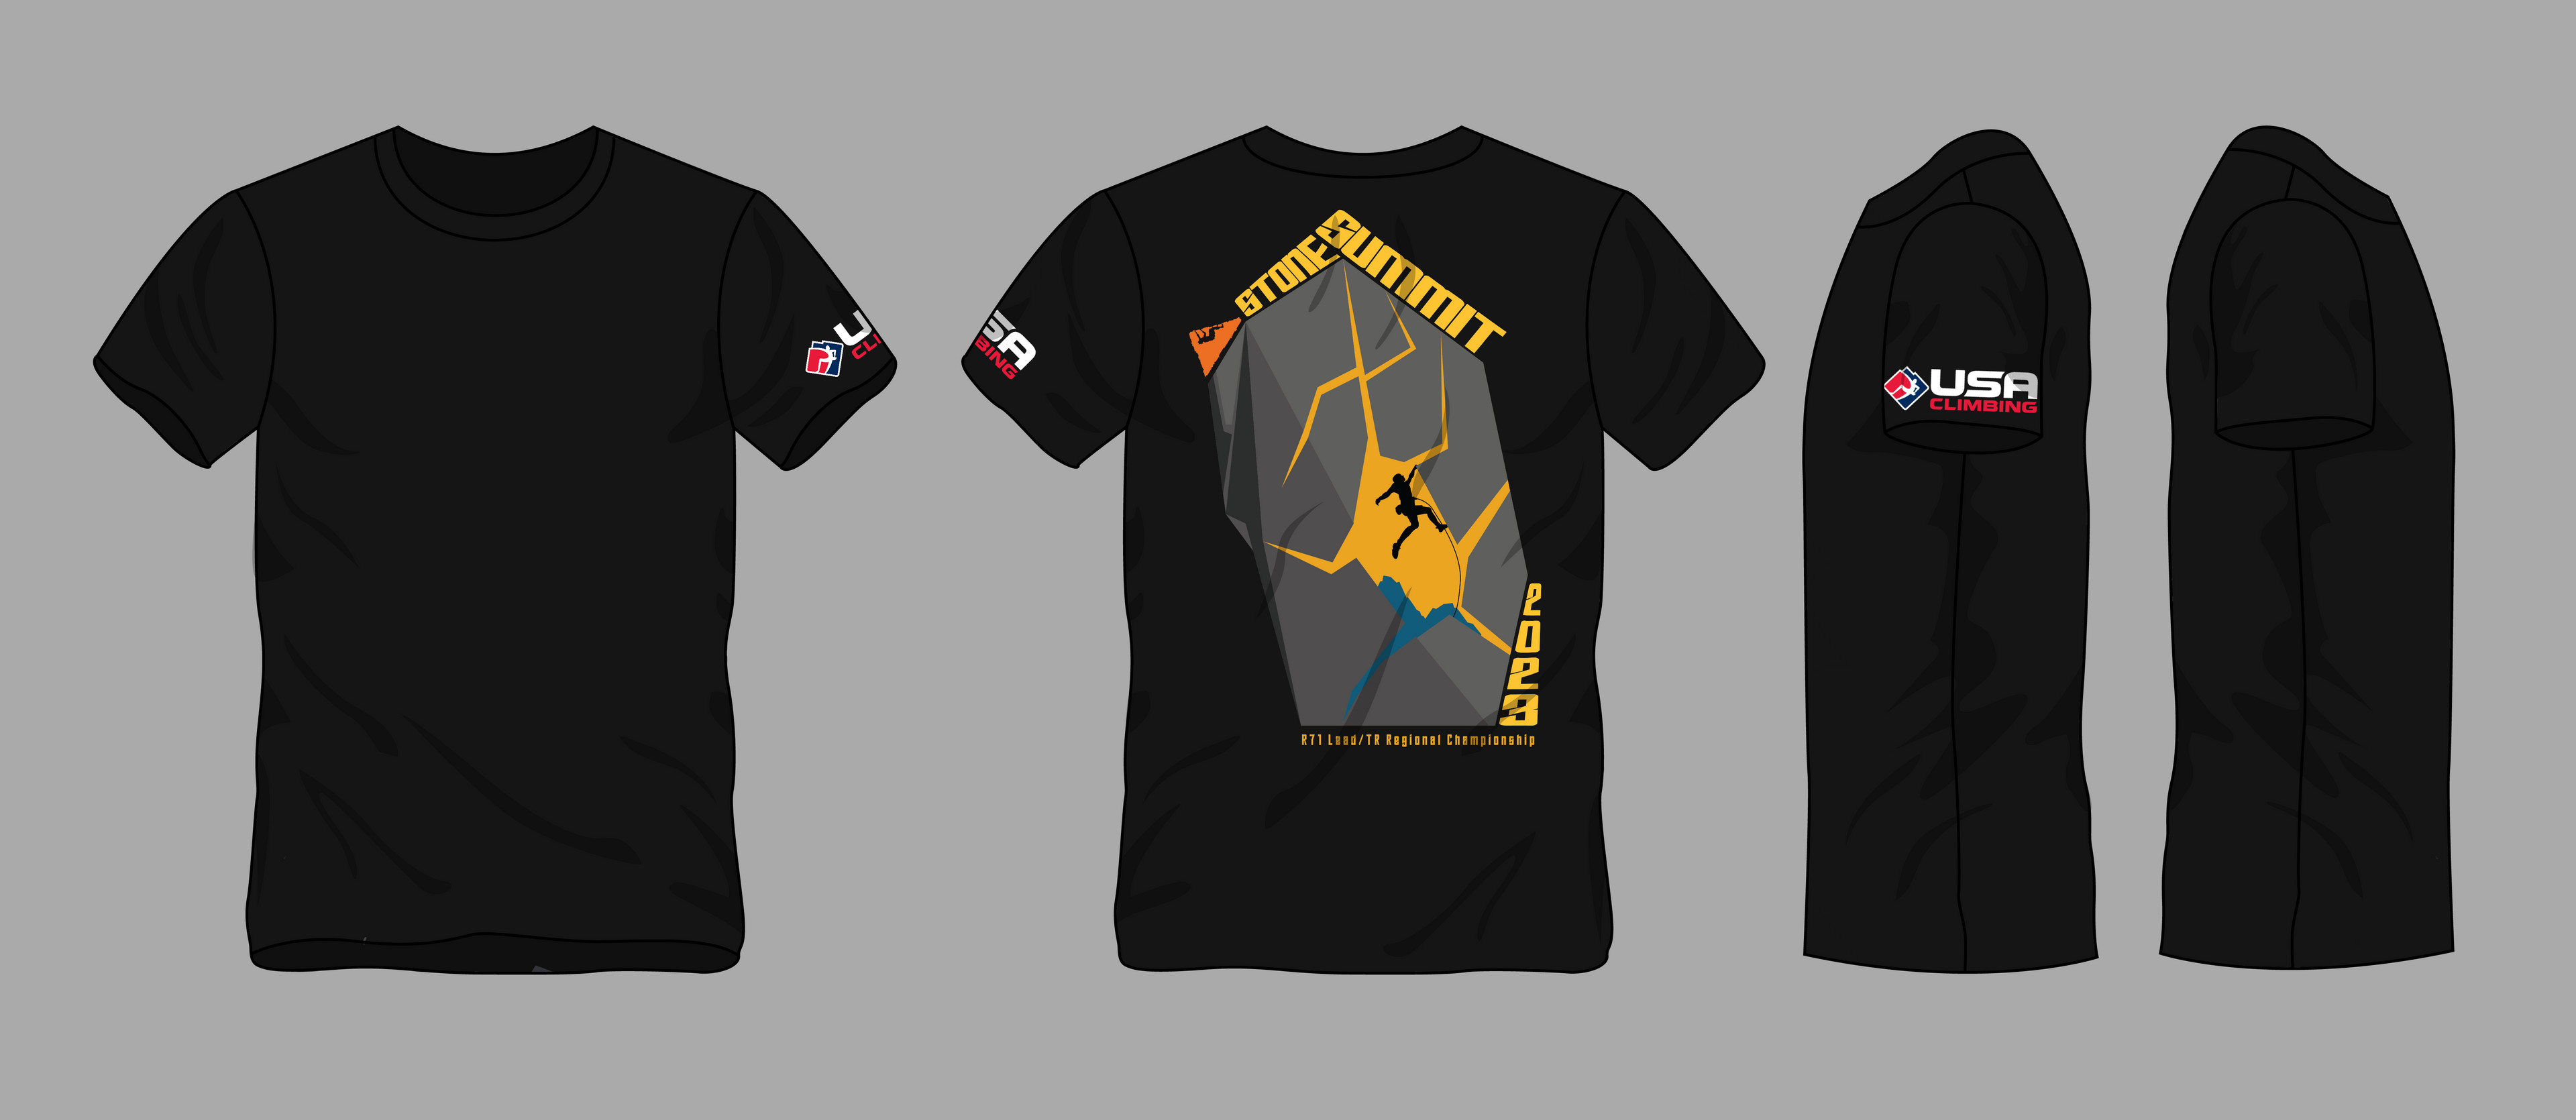 2023 T-shirt design for USA Climbing's Region 71 Regionals climbing competition hosted at Stone Summit.